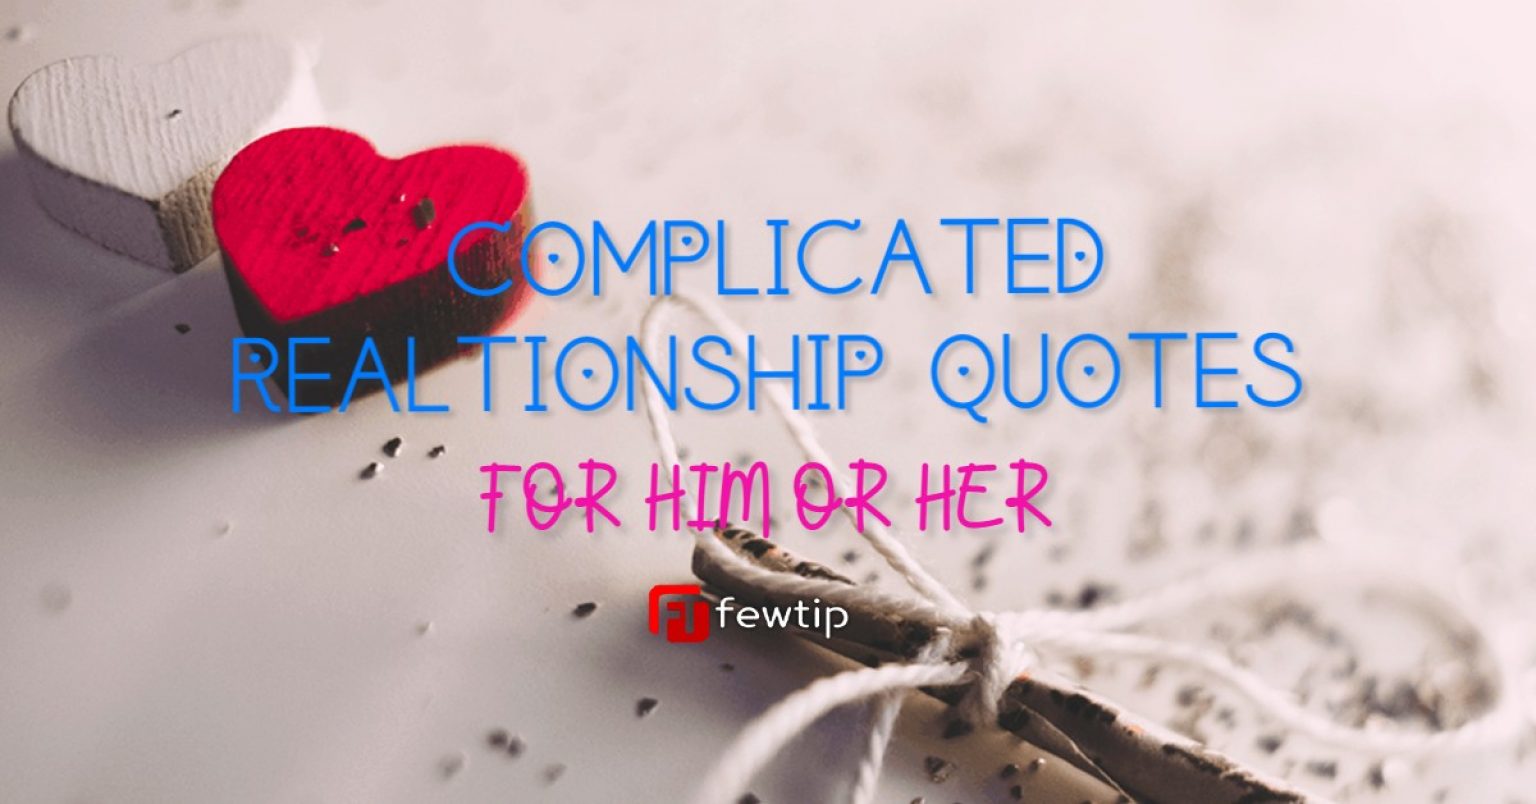 Complicated relationship quotes